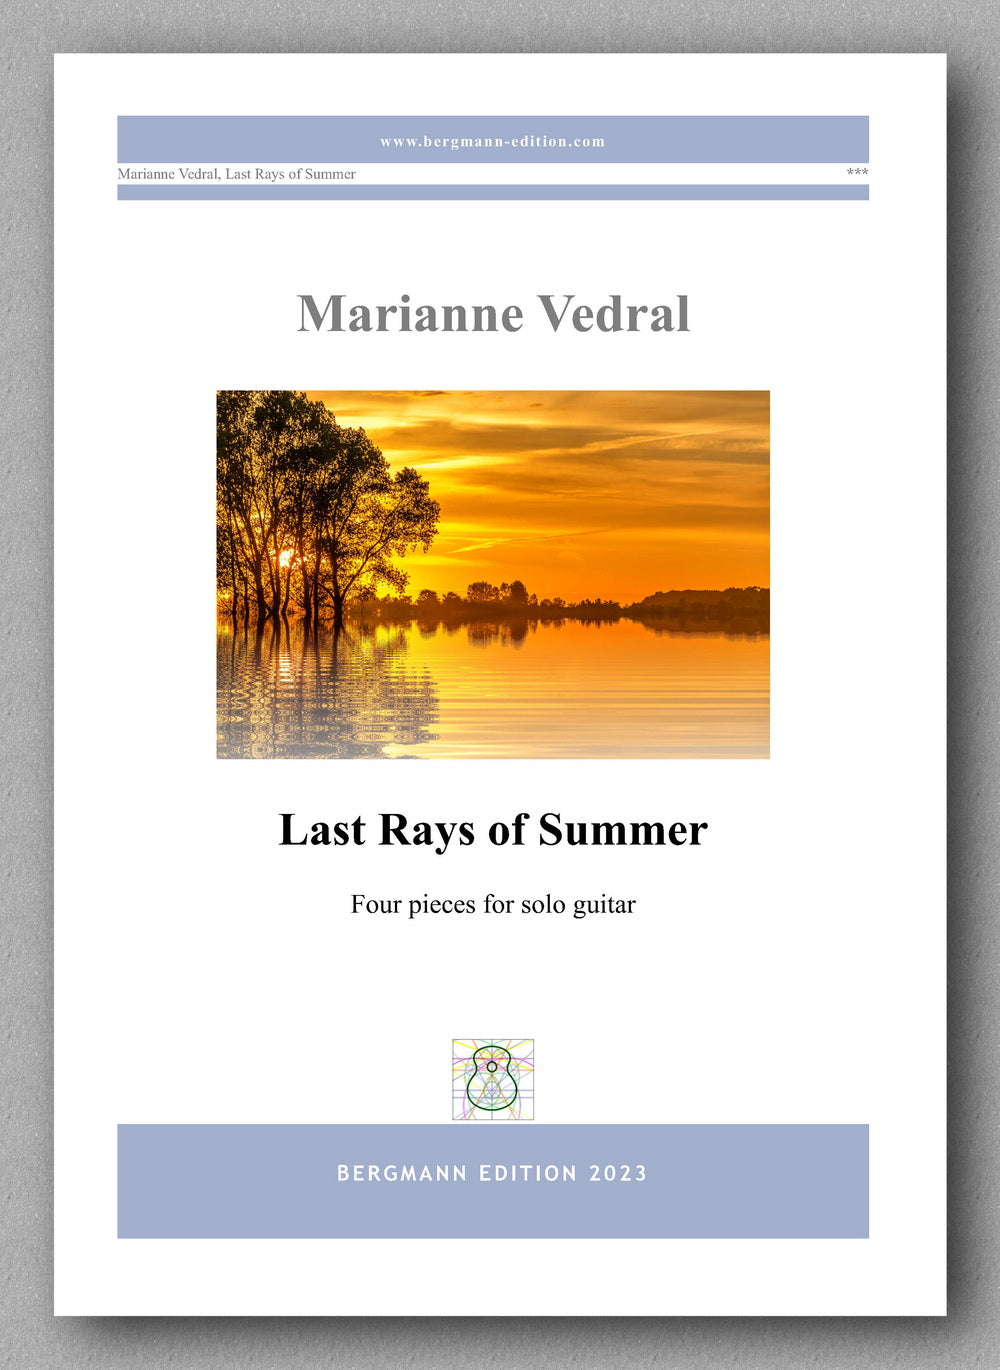 Last Rays of Summer by Marianne Vedral - preview of the cover